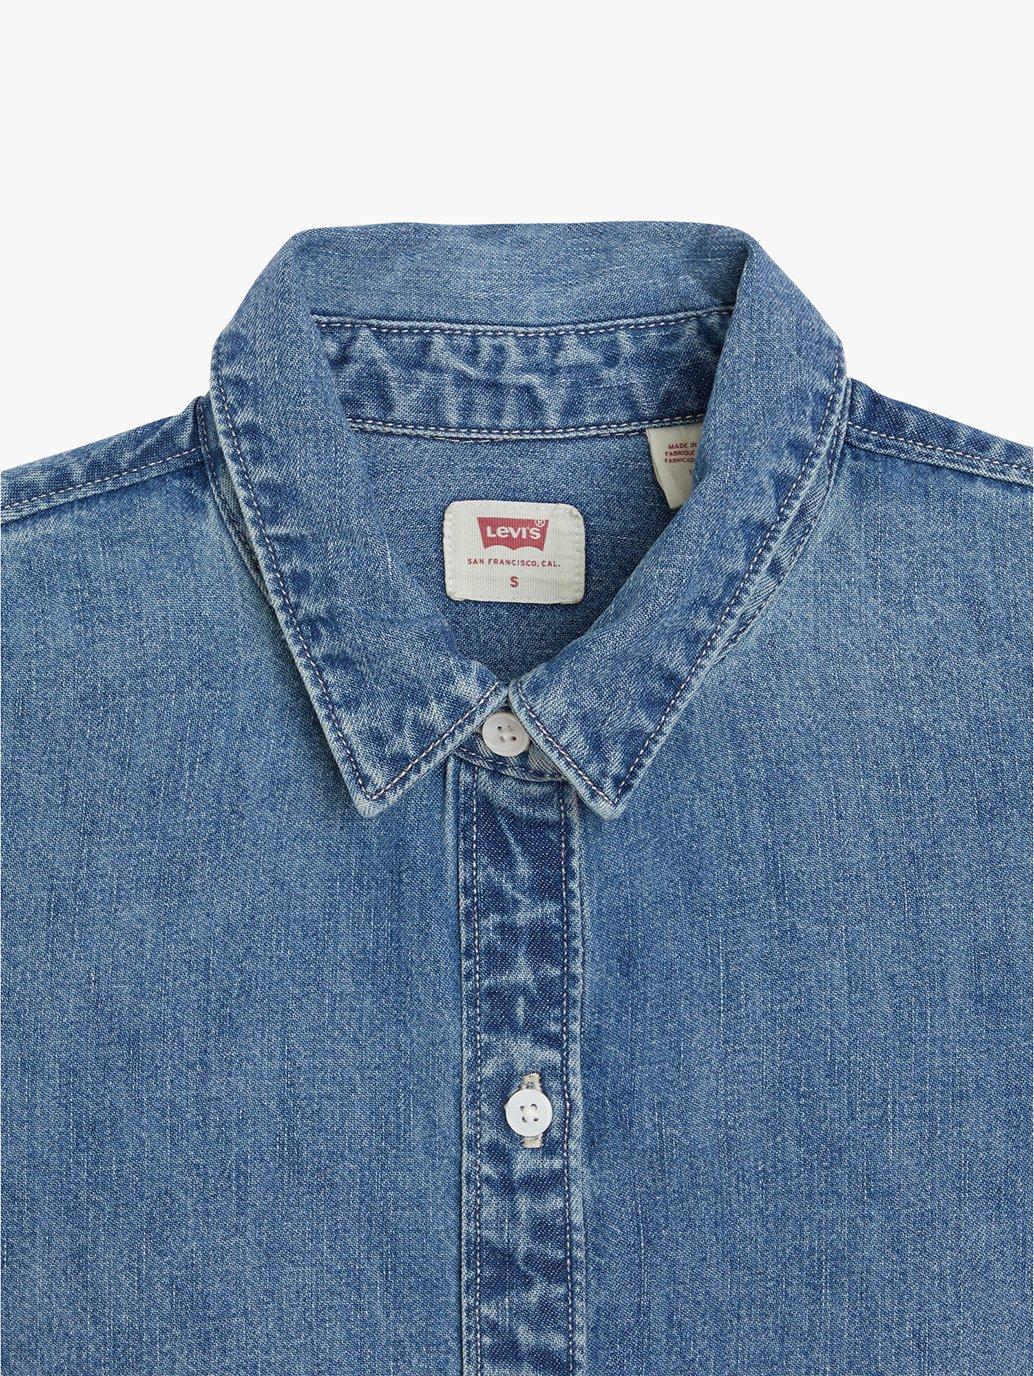 levis malaysia womens zuma cinched sleeve blouse A18830002 16 Details